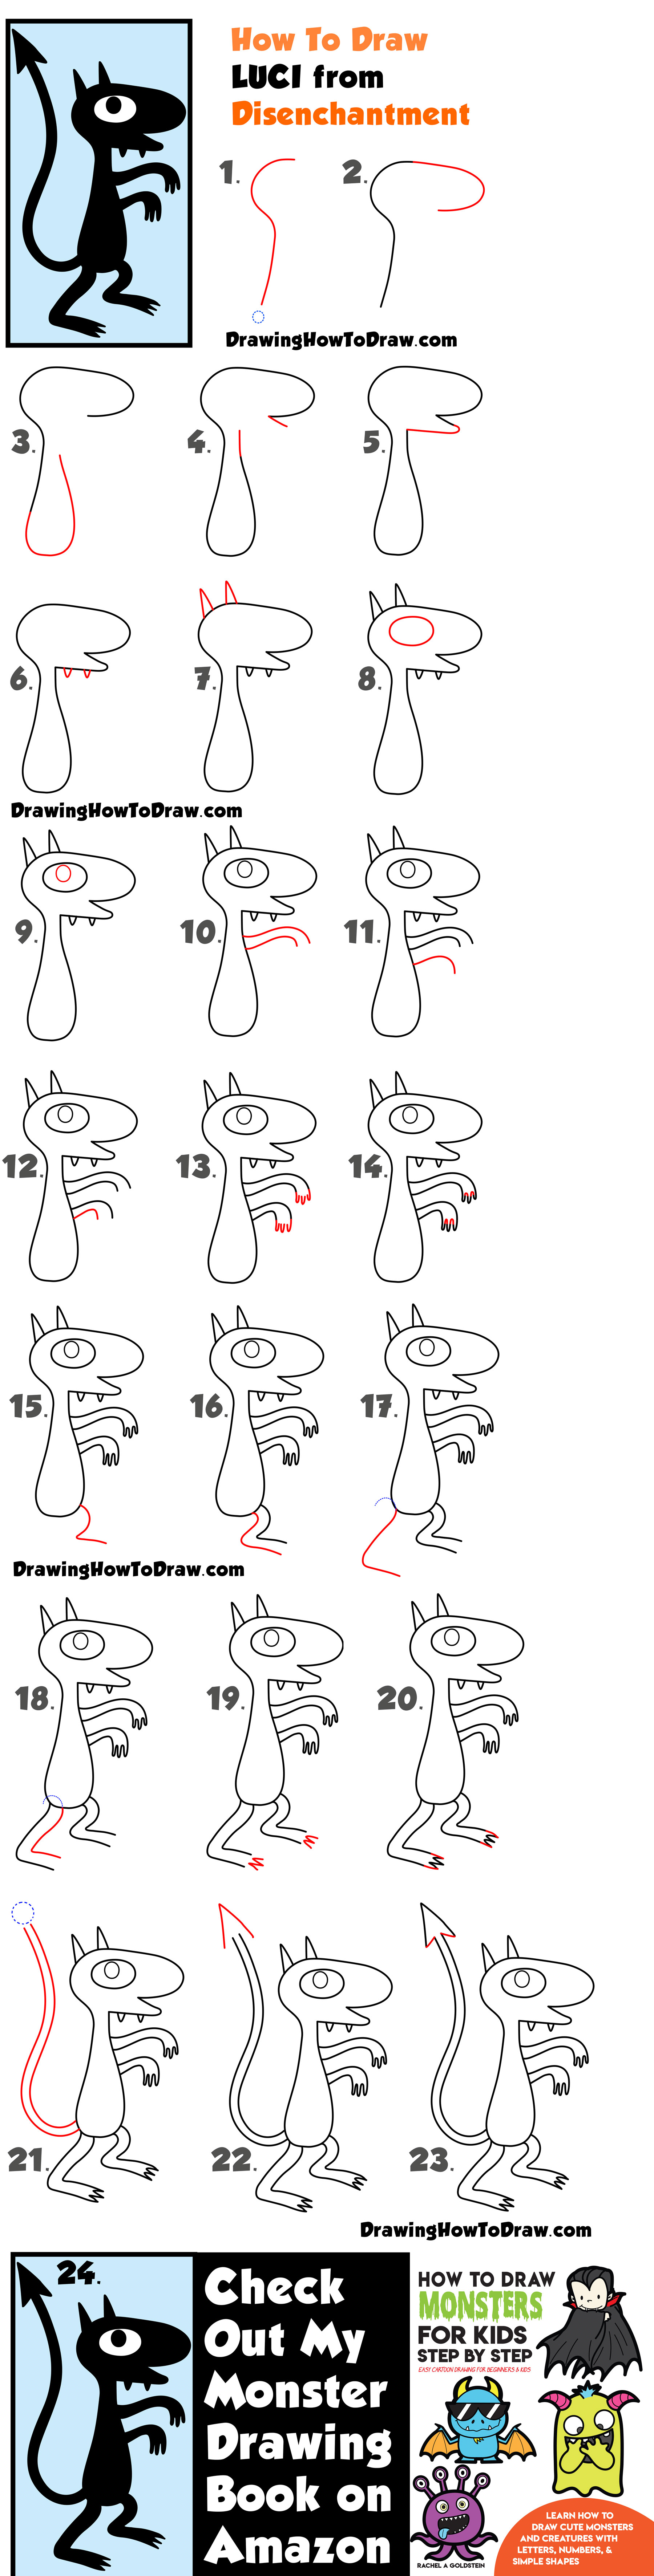 Learn How to Draw Luck from Disenchantment Simple Steps Drawing Lesson for Kids & Beginners